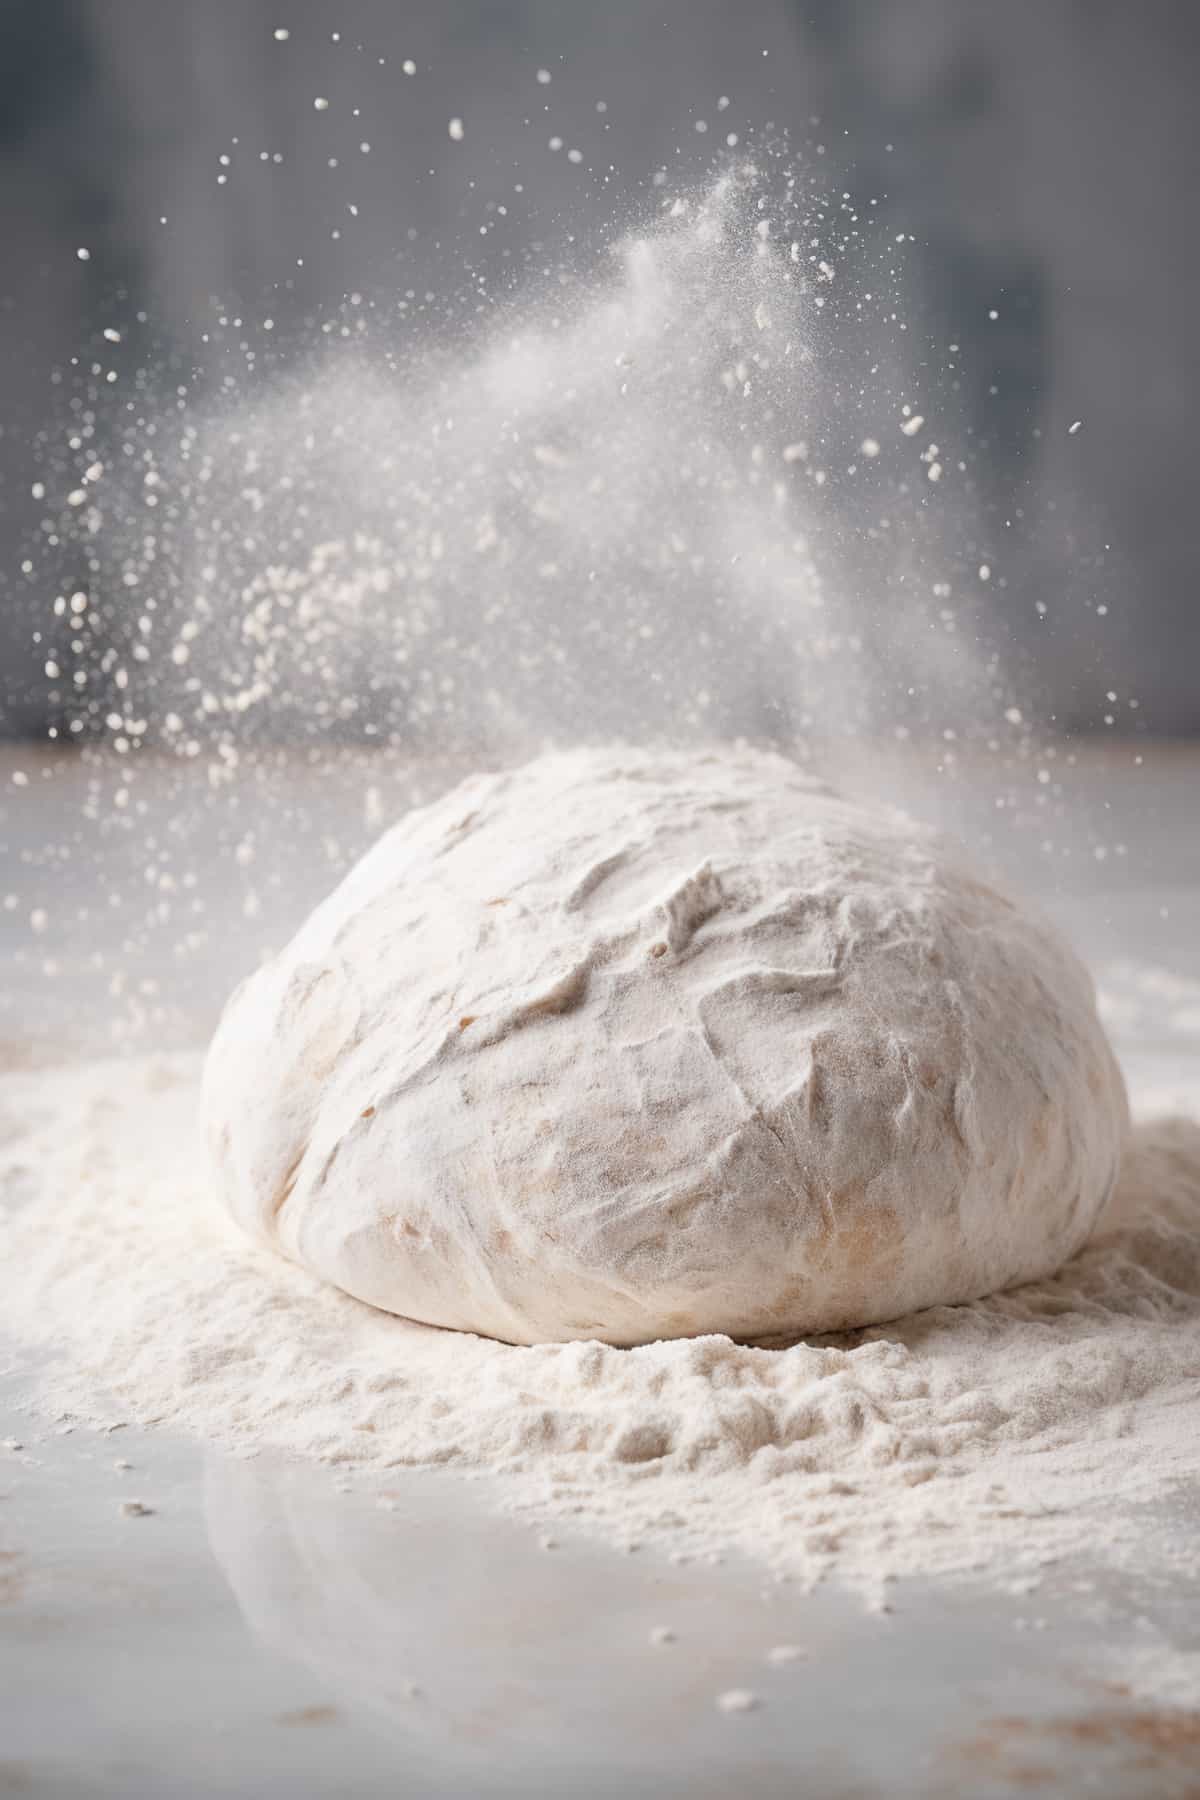 Bread dough on a floured surface left to rise.